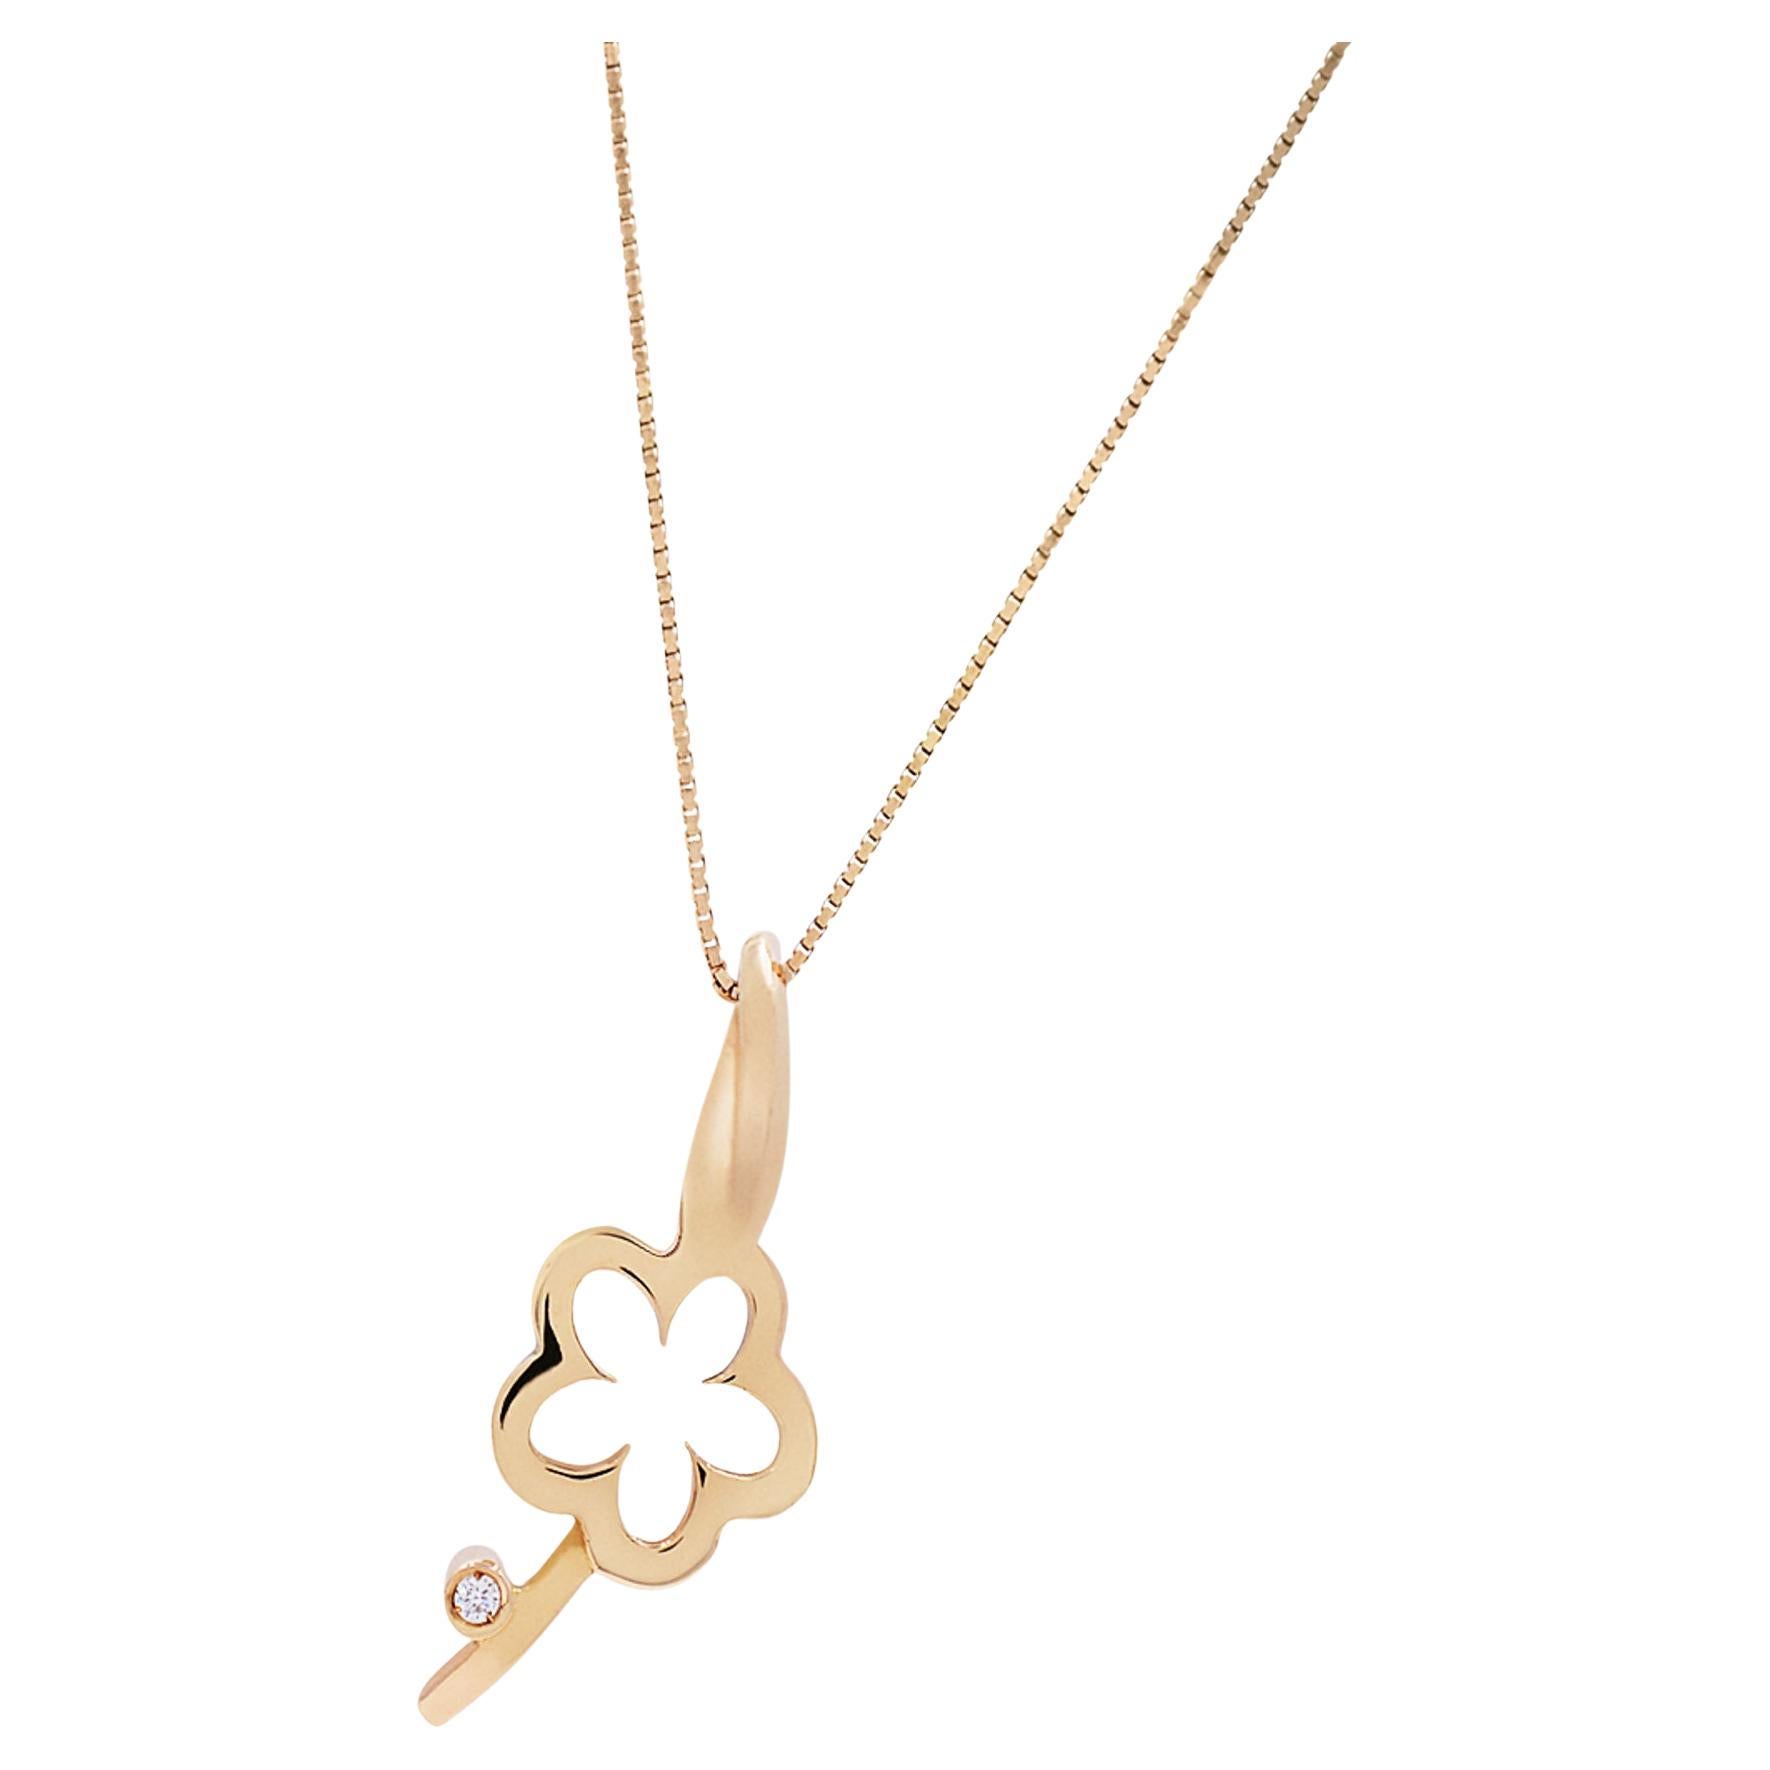 Fall in love with this beautiful flower pendant with a single dazzling round cut diamond. This pendant is a perfect gift for any occasion. It features a flower charm measuring 15mm long with stunning details and encrusted with one round cut diamond